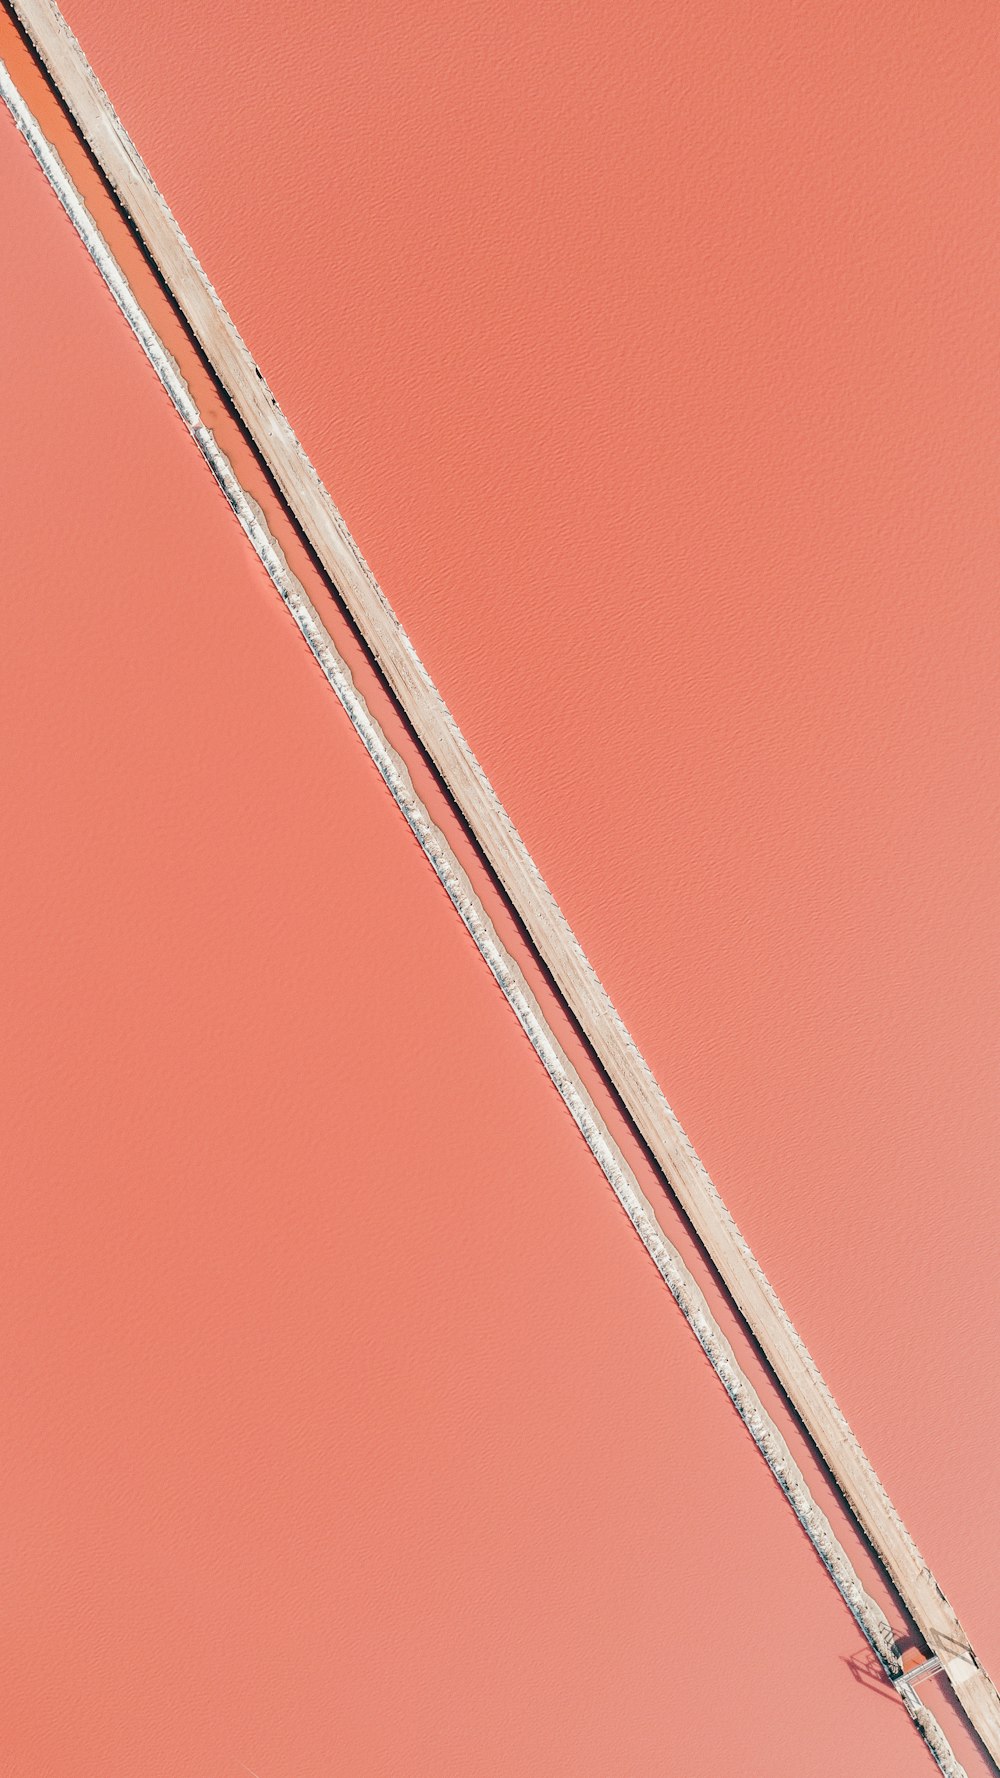 a pair of skis sitting on top of a pink surface